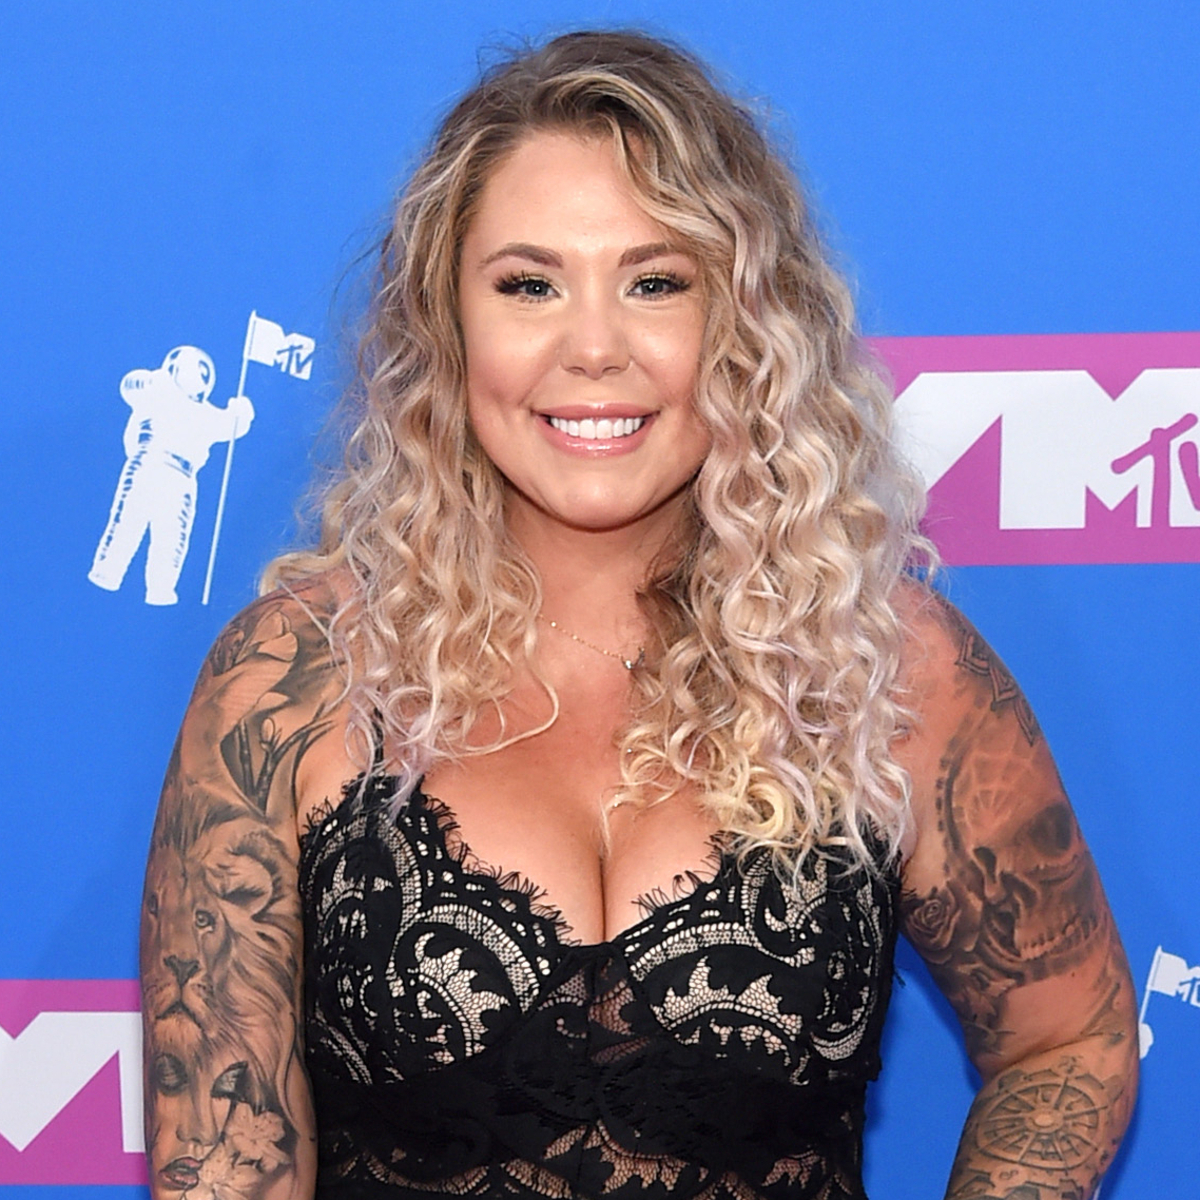 Teen Mom’s Kailyn Lowry Reveals Names of Her Newborn Twins